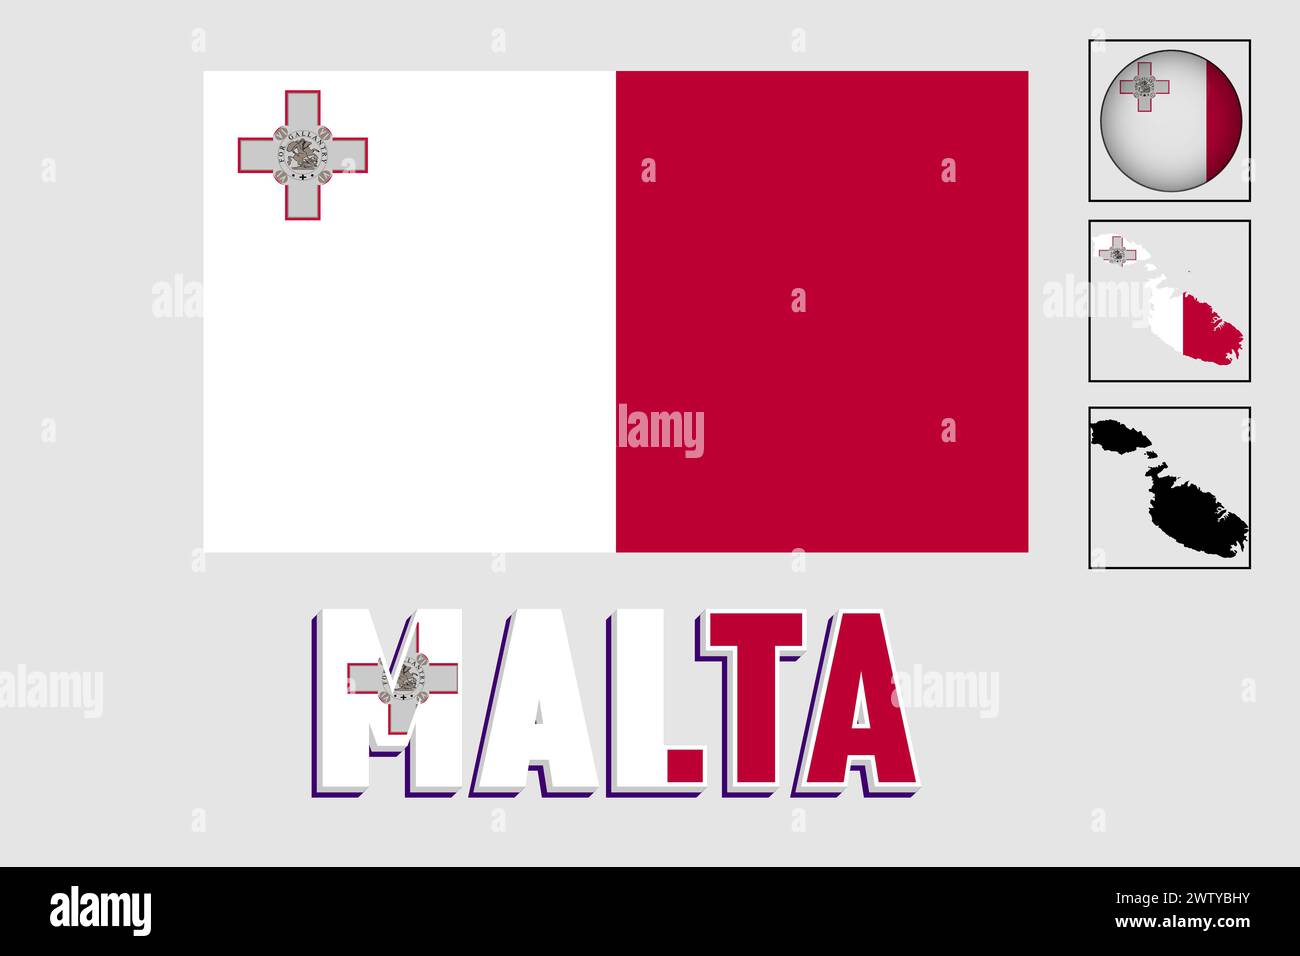 Malta flag and map in a vector graphic Stock Vector